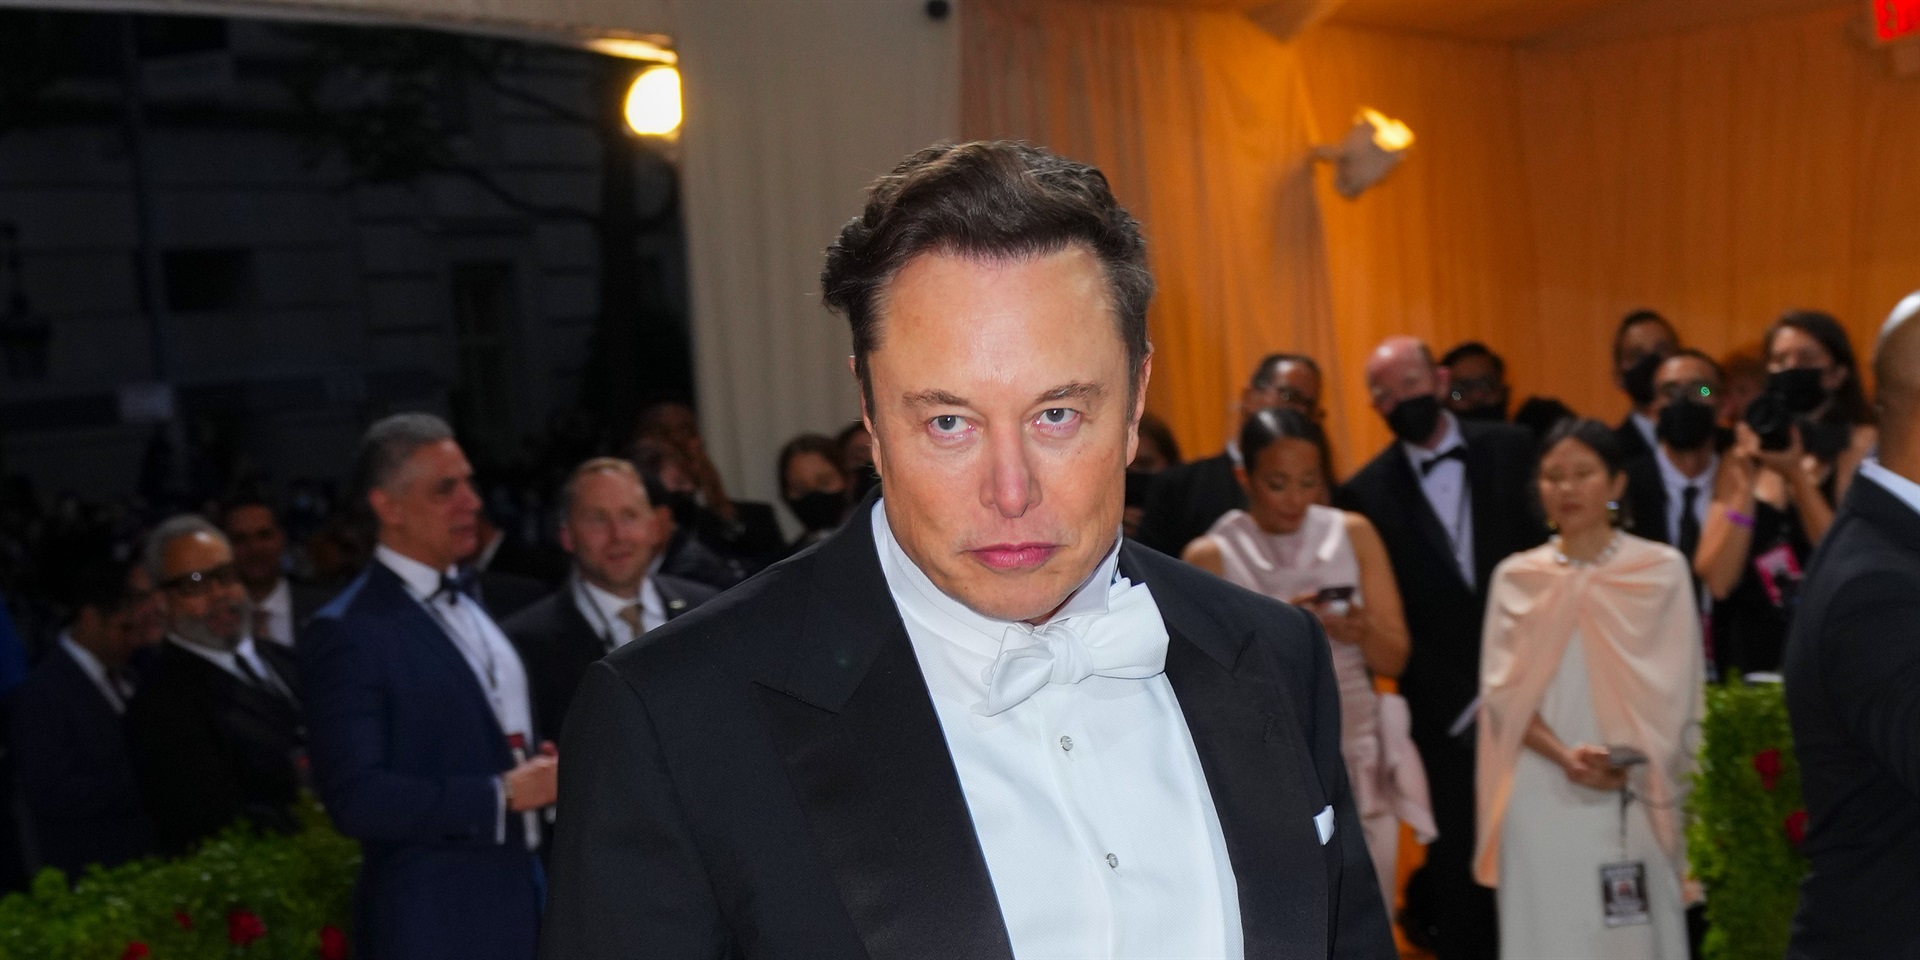 Elon Musk floated his pro-Kremlin Ukraine peace plan at a summit 10 days before tweeting it, report says